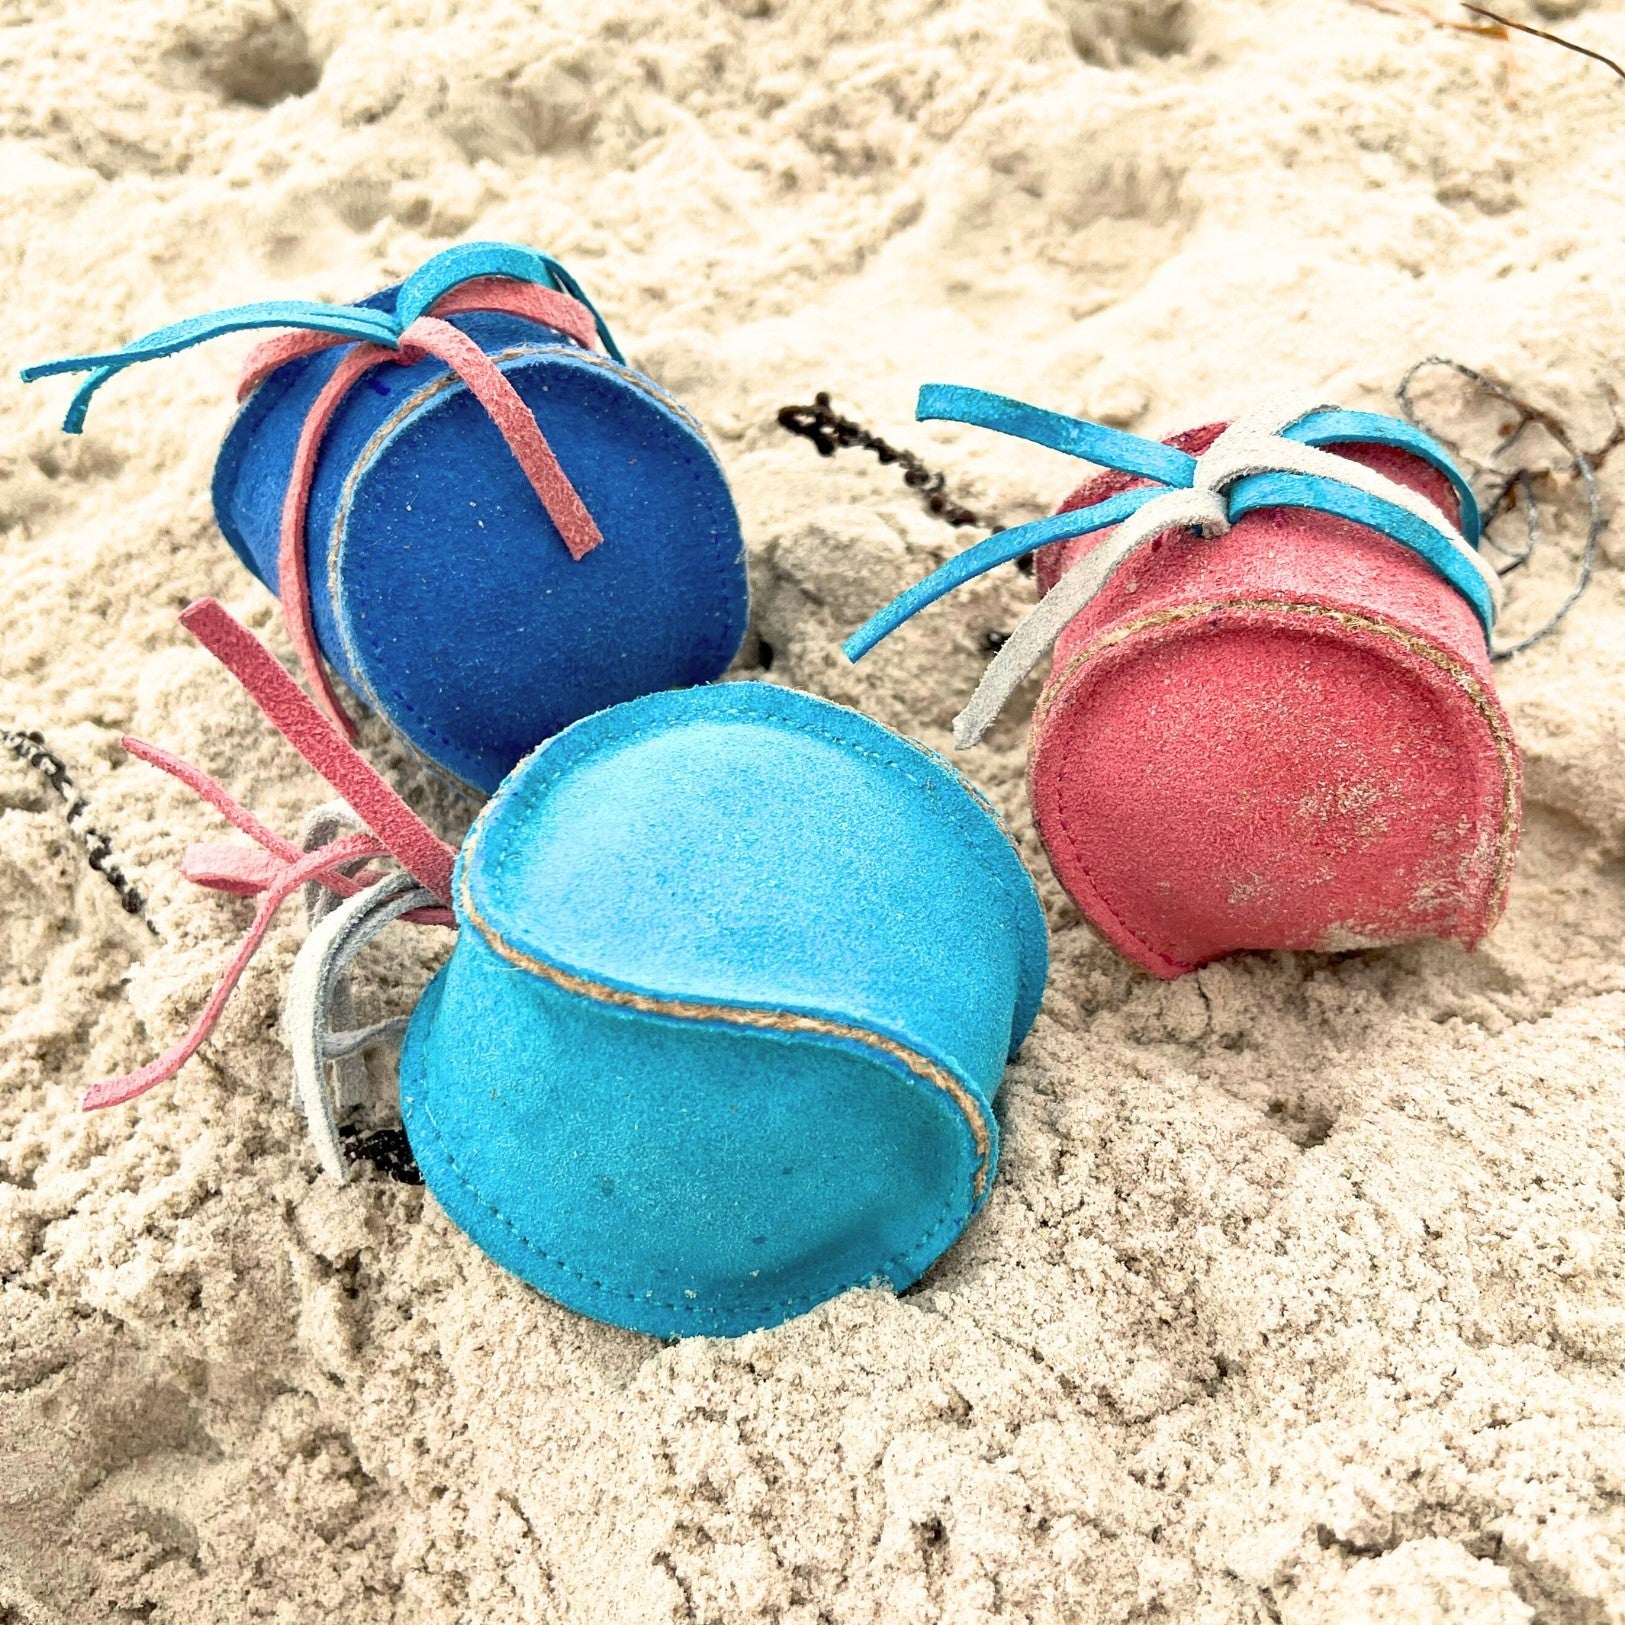 Three colorful, well-worn Georgie Paws hacky sacks—blue, turquoise, and red—made of buffalo suede, resting on sandy beach ground, hinting at playful activities under the sun.